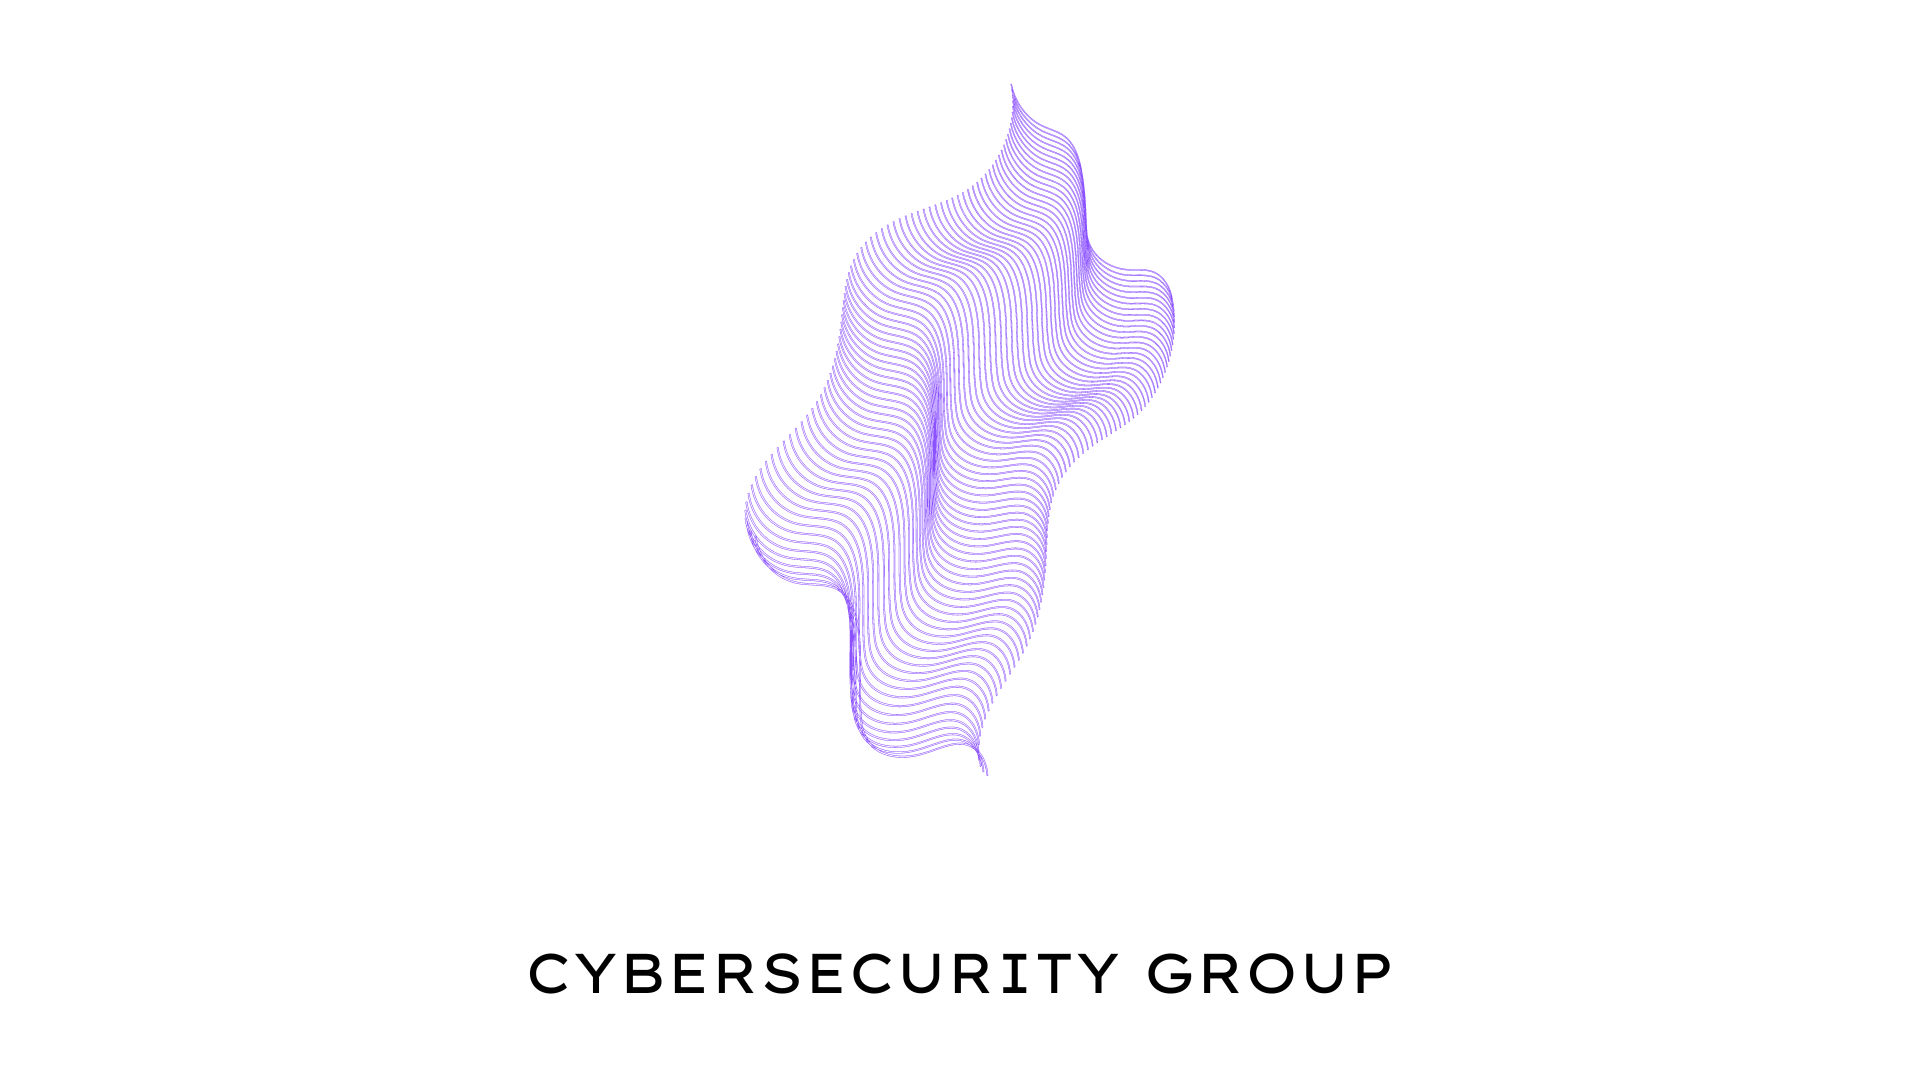 Illustration of Cybersecurity Group